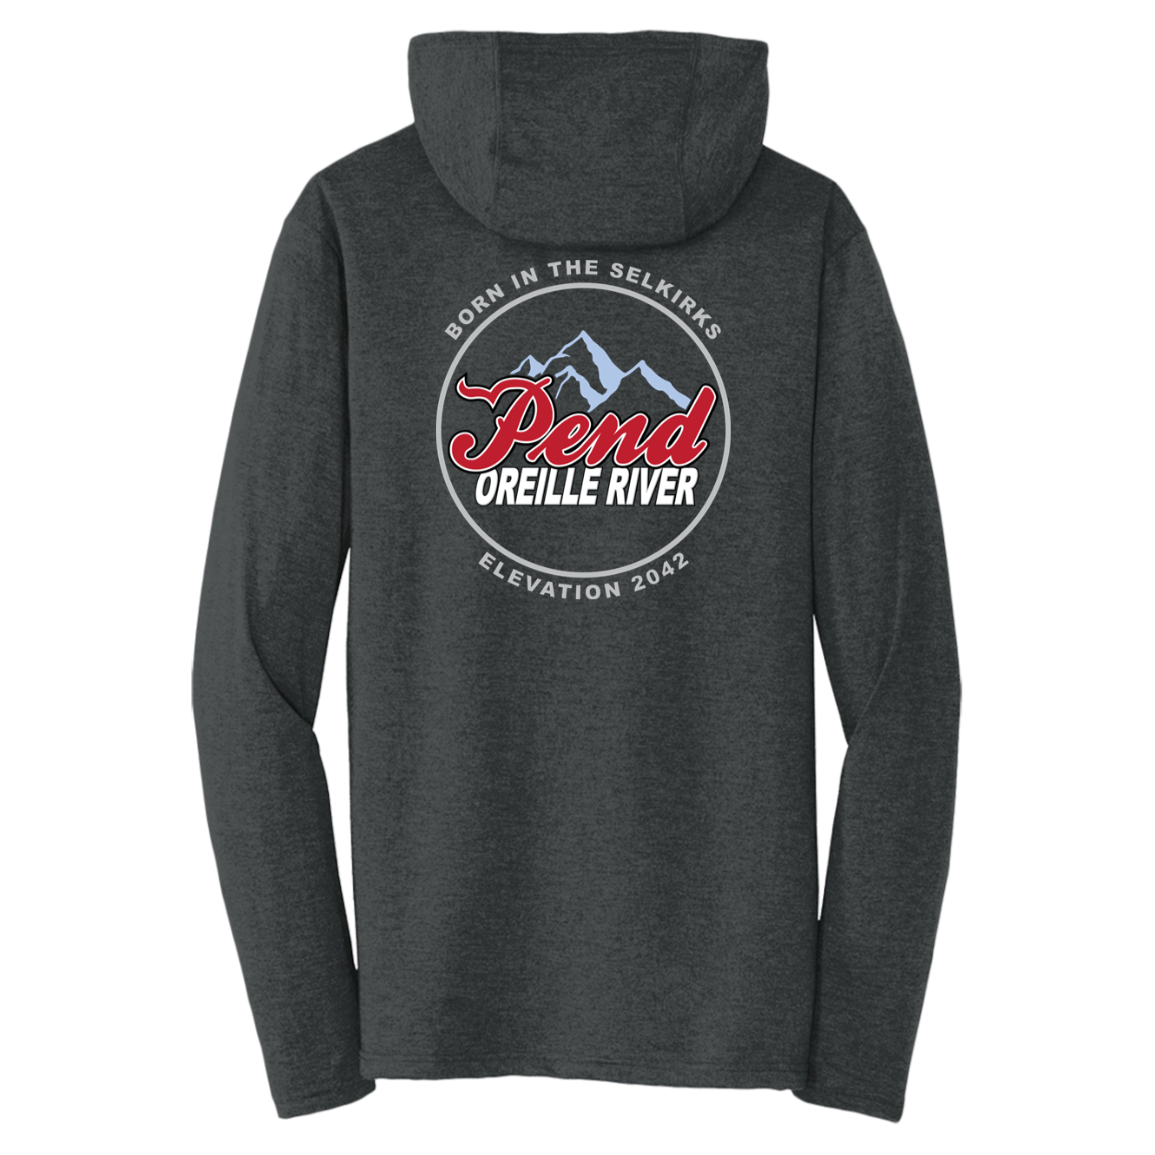 Silver Bullet (Front & Back) Shirt Hoodie